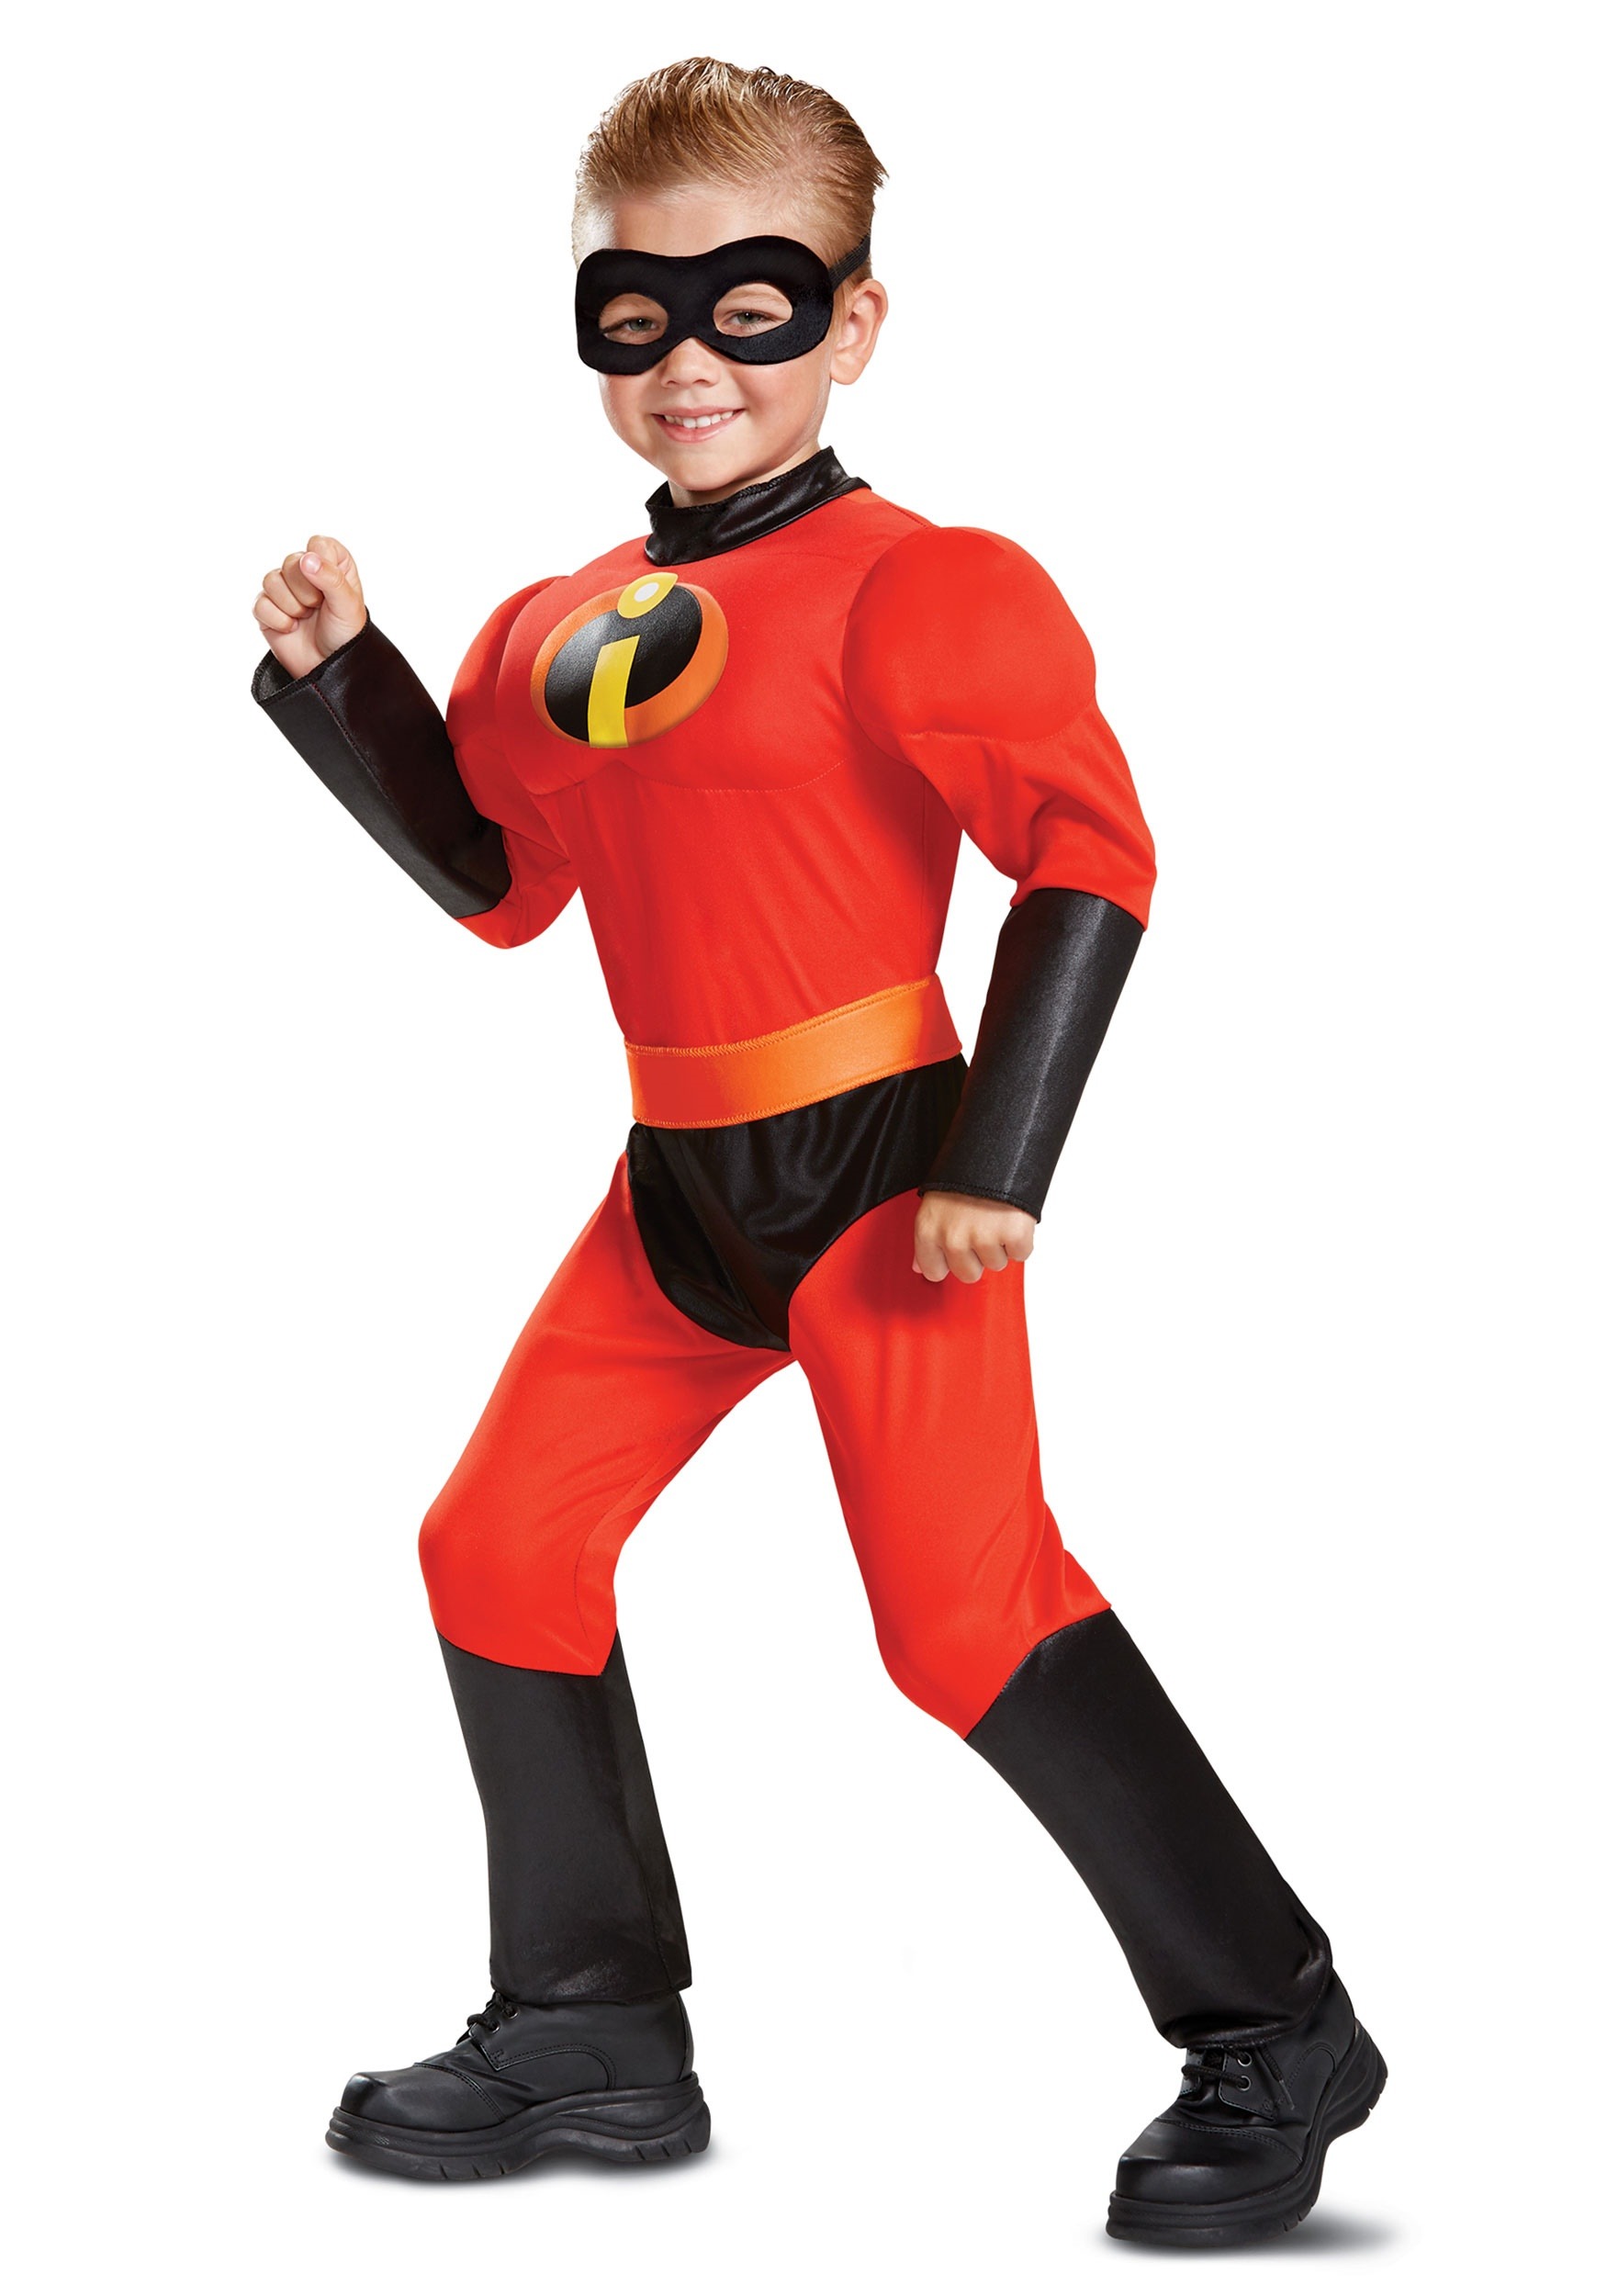 https://images.halloweencostumes.com/products/45925/1-1/disney-incredibles-2-classic-dash-muscle-toddler-costume.jpg